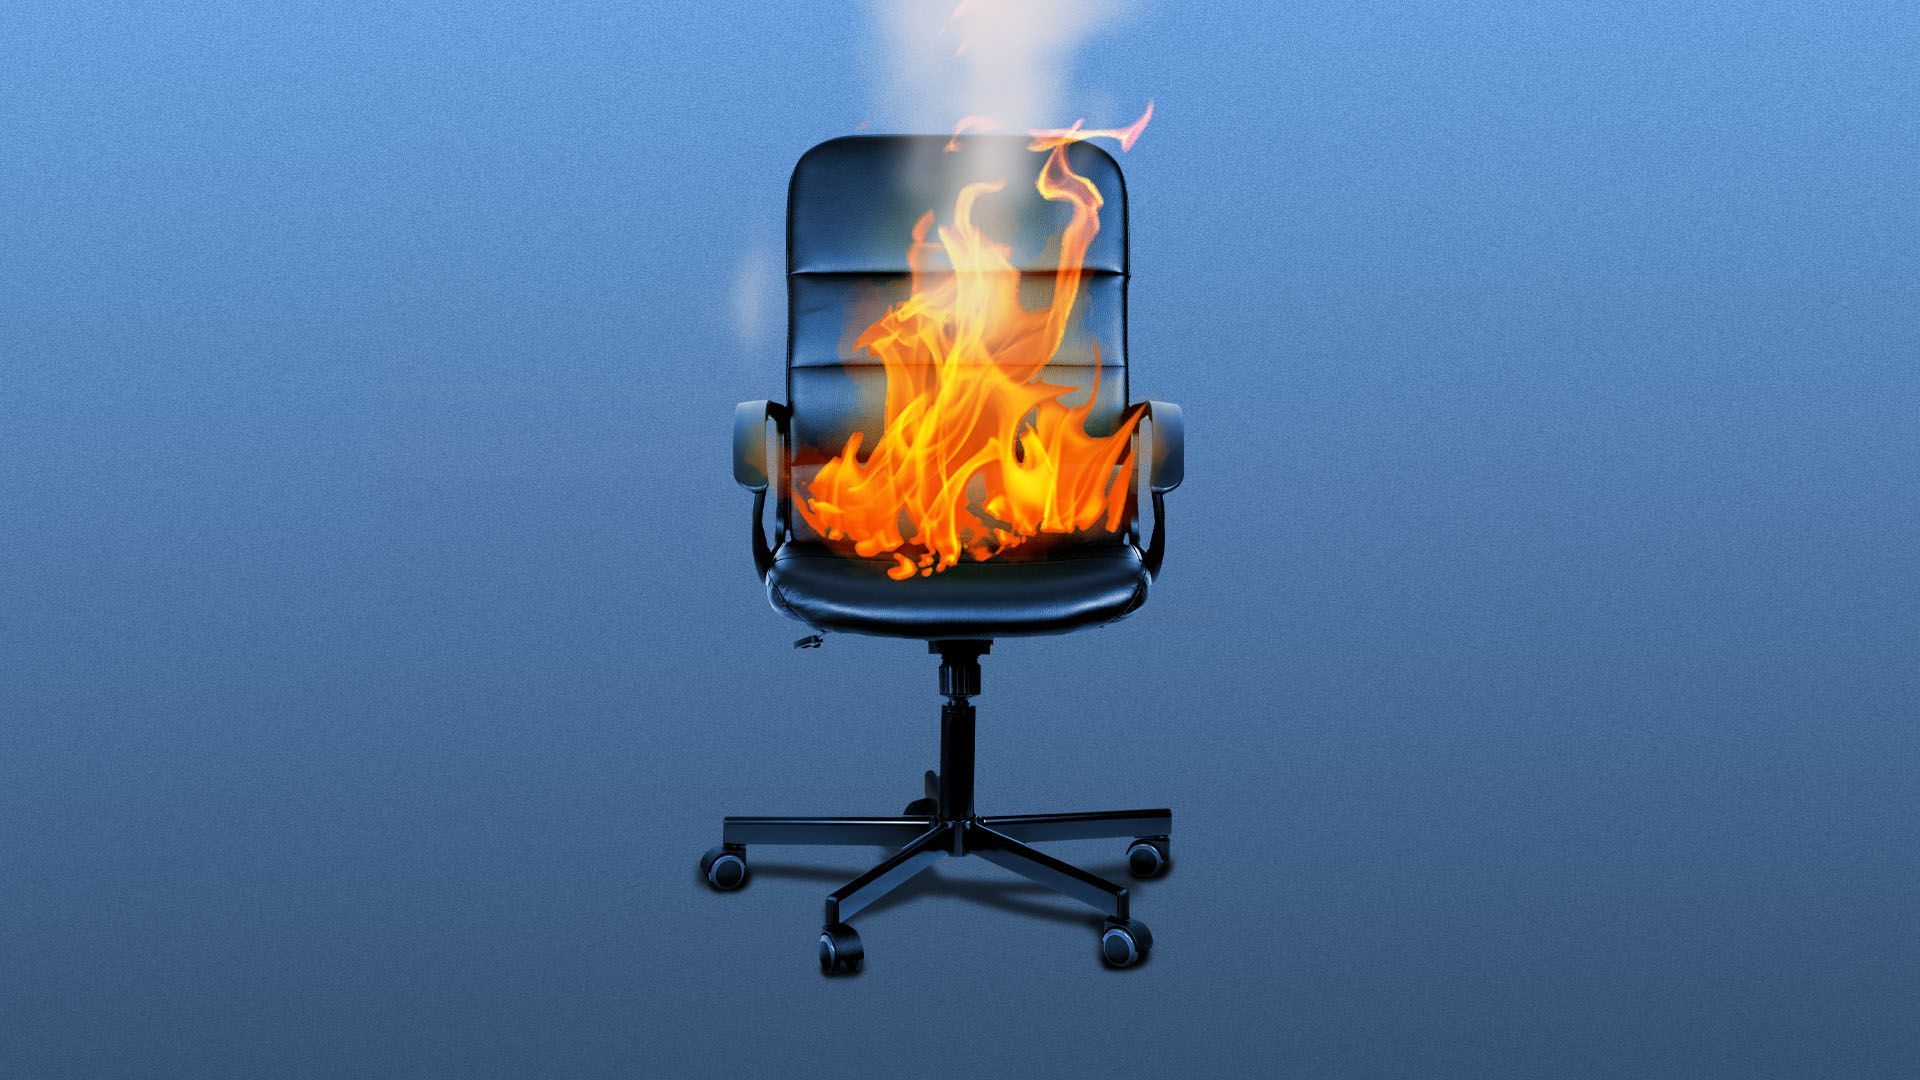 Illustration of an office chair on fire